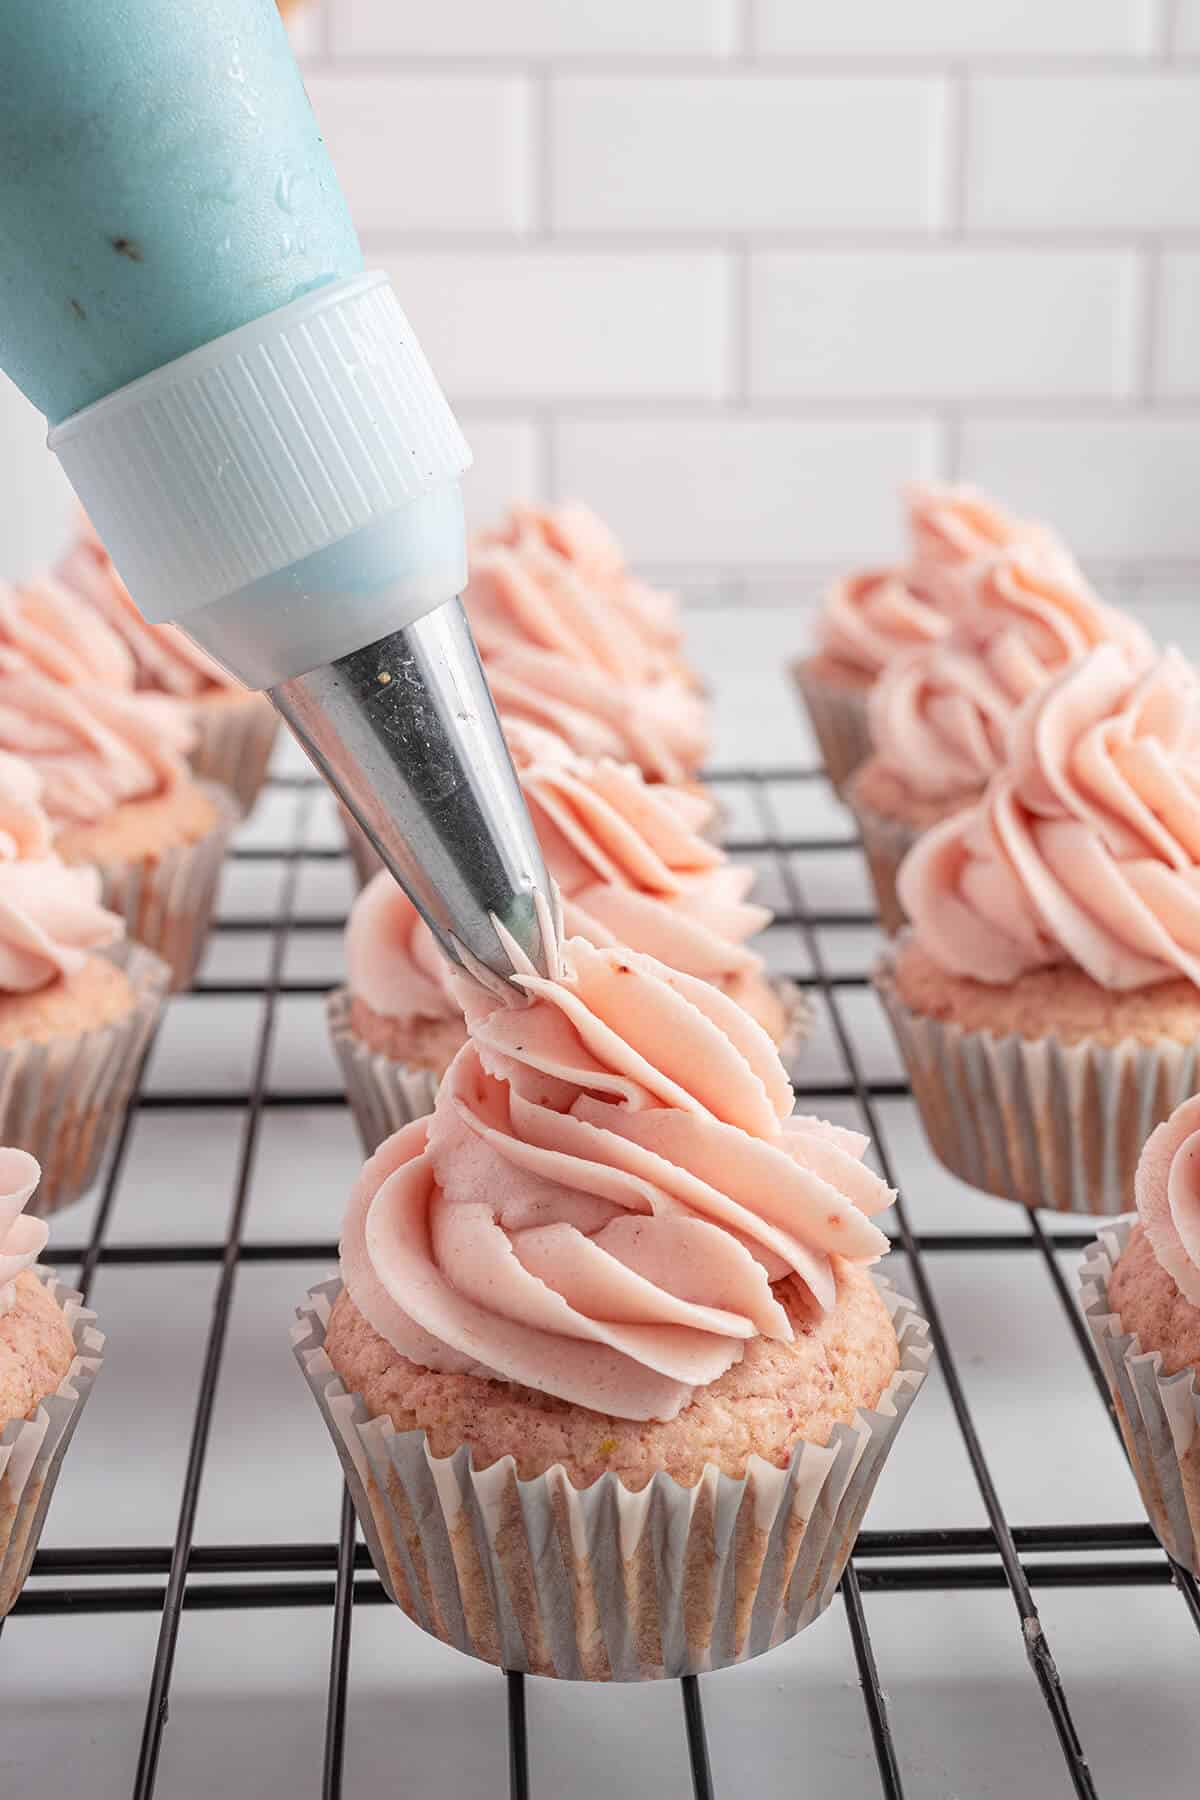 Piping strawberry buttercream frosting on a cupcake.